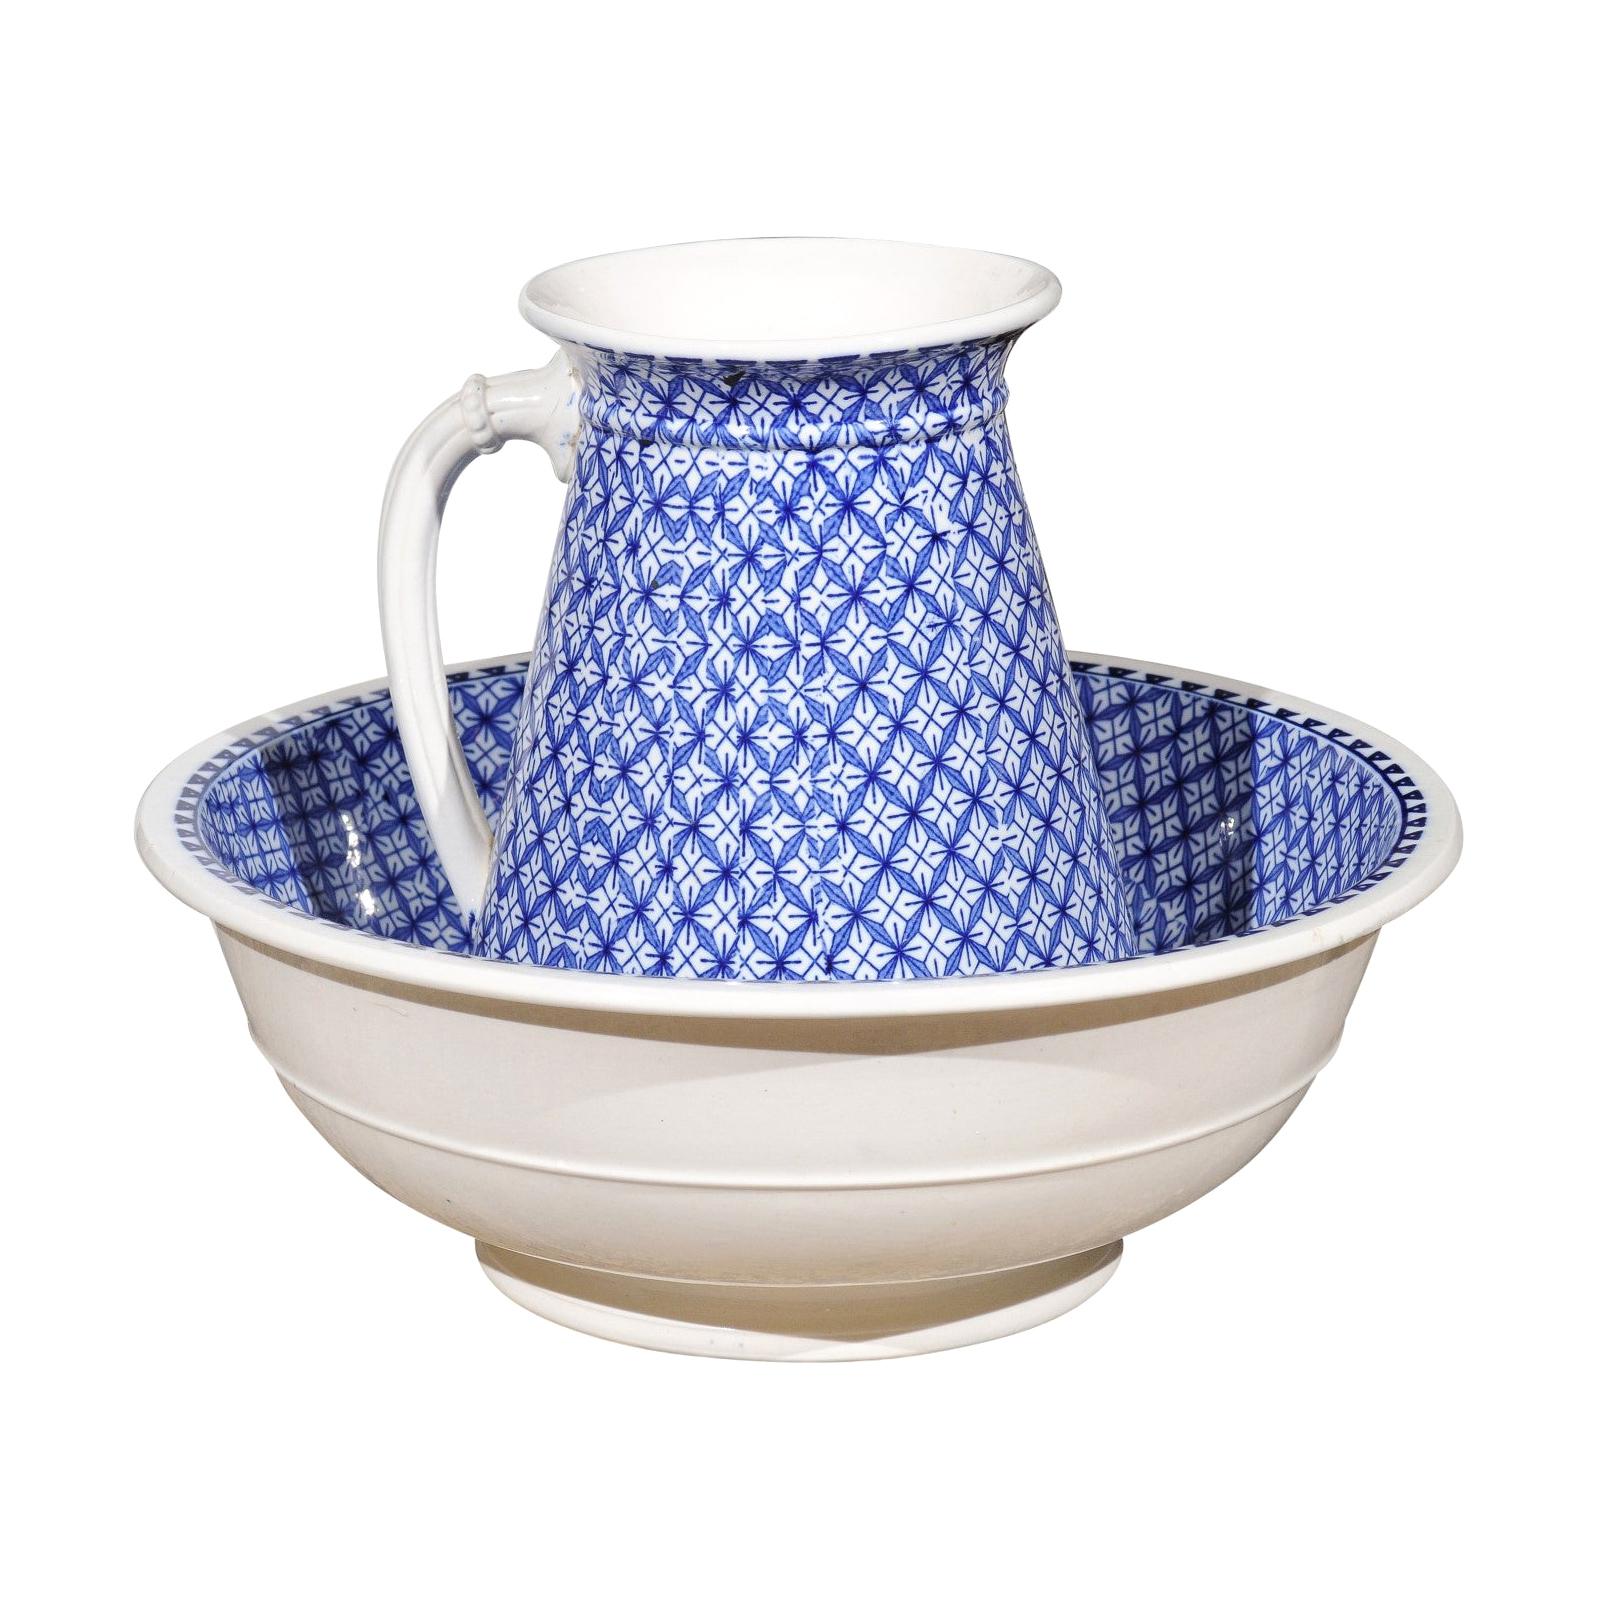 What is the historical significance of blue and white in ceramics?